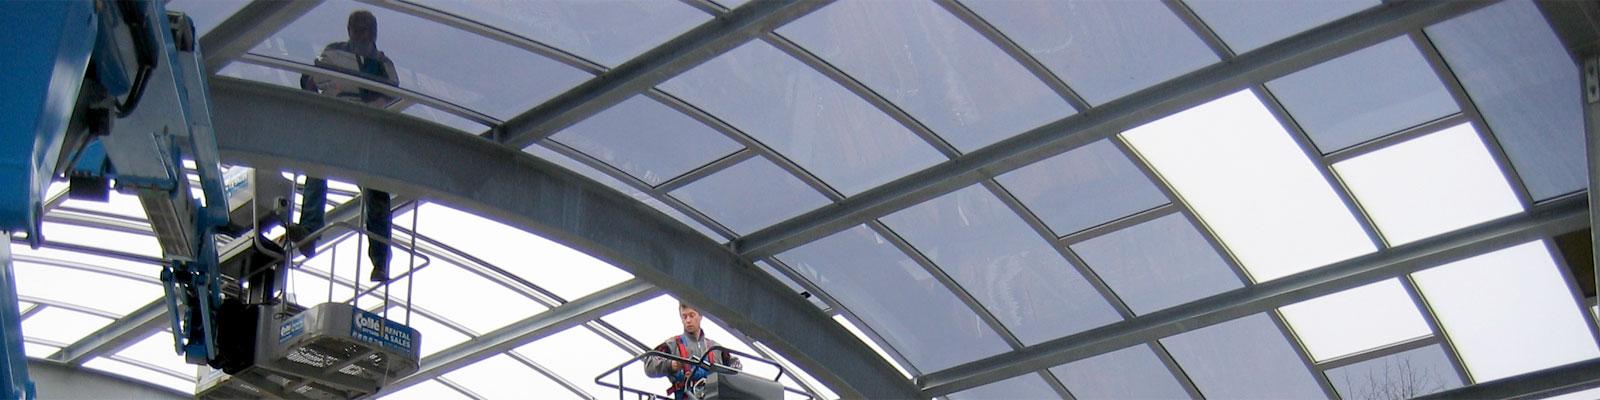 polycarbonate-rooflight10